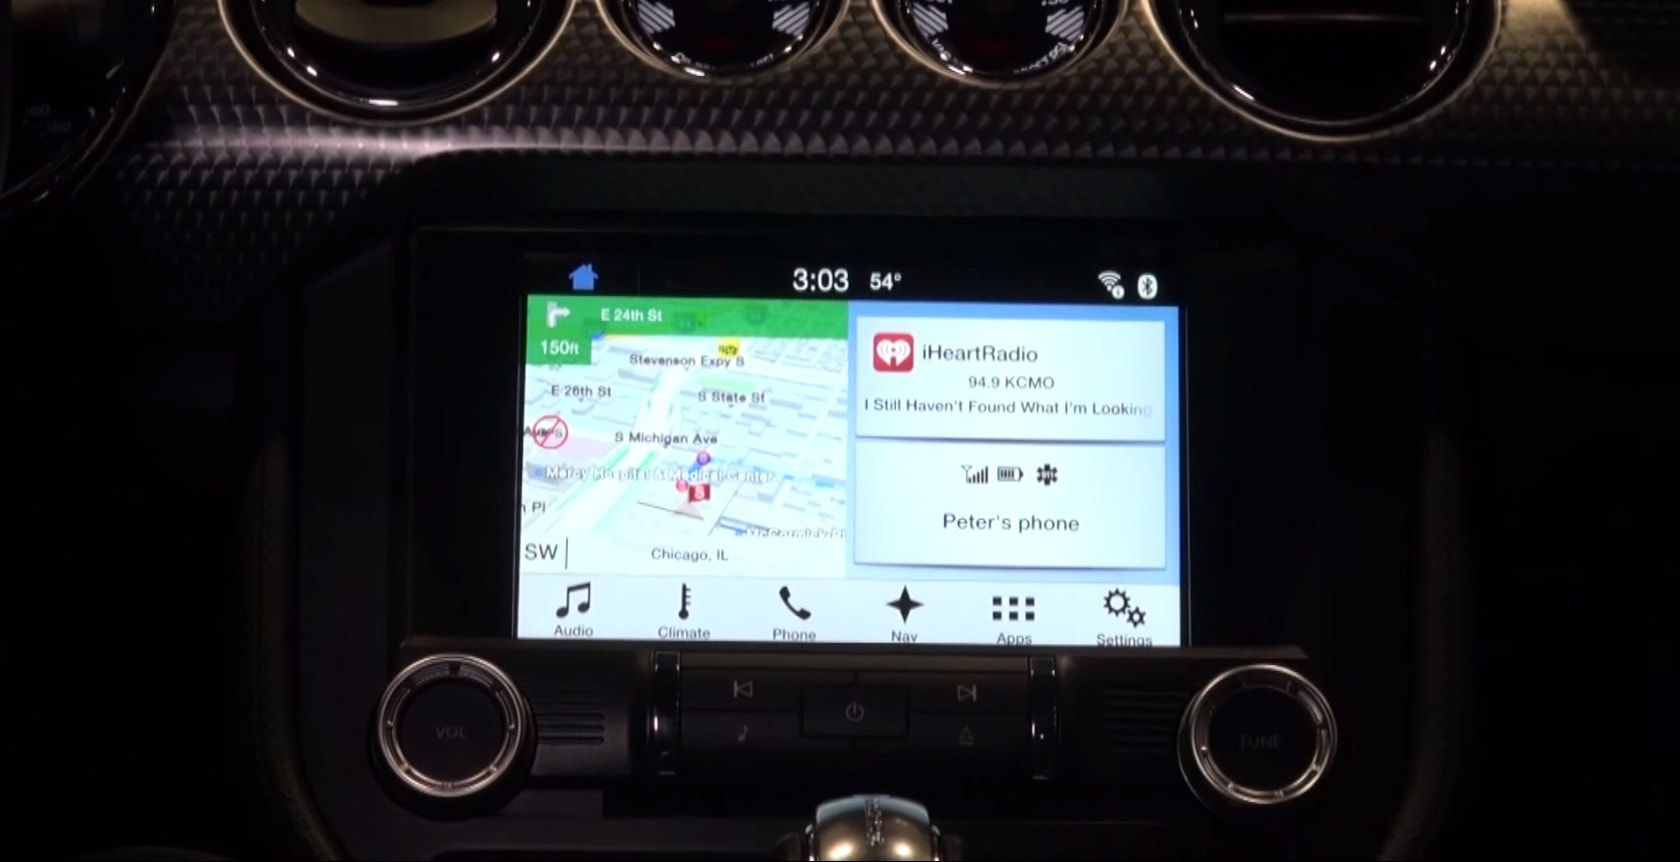 The ford sync system #9